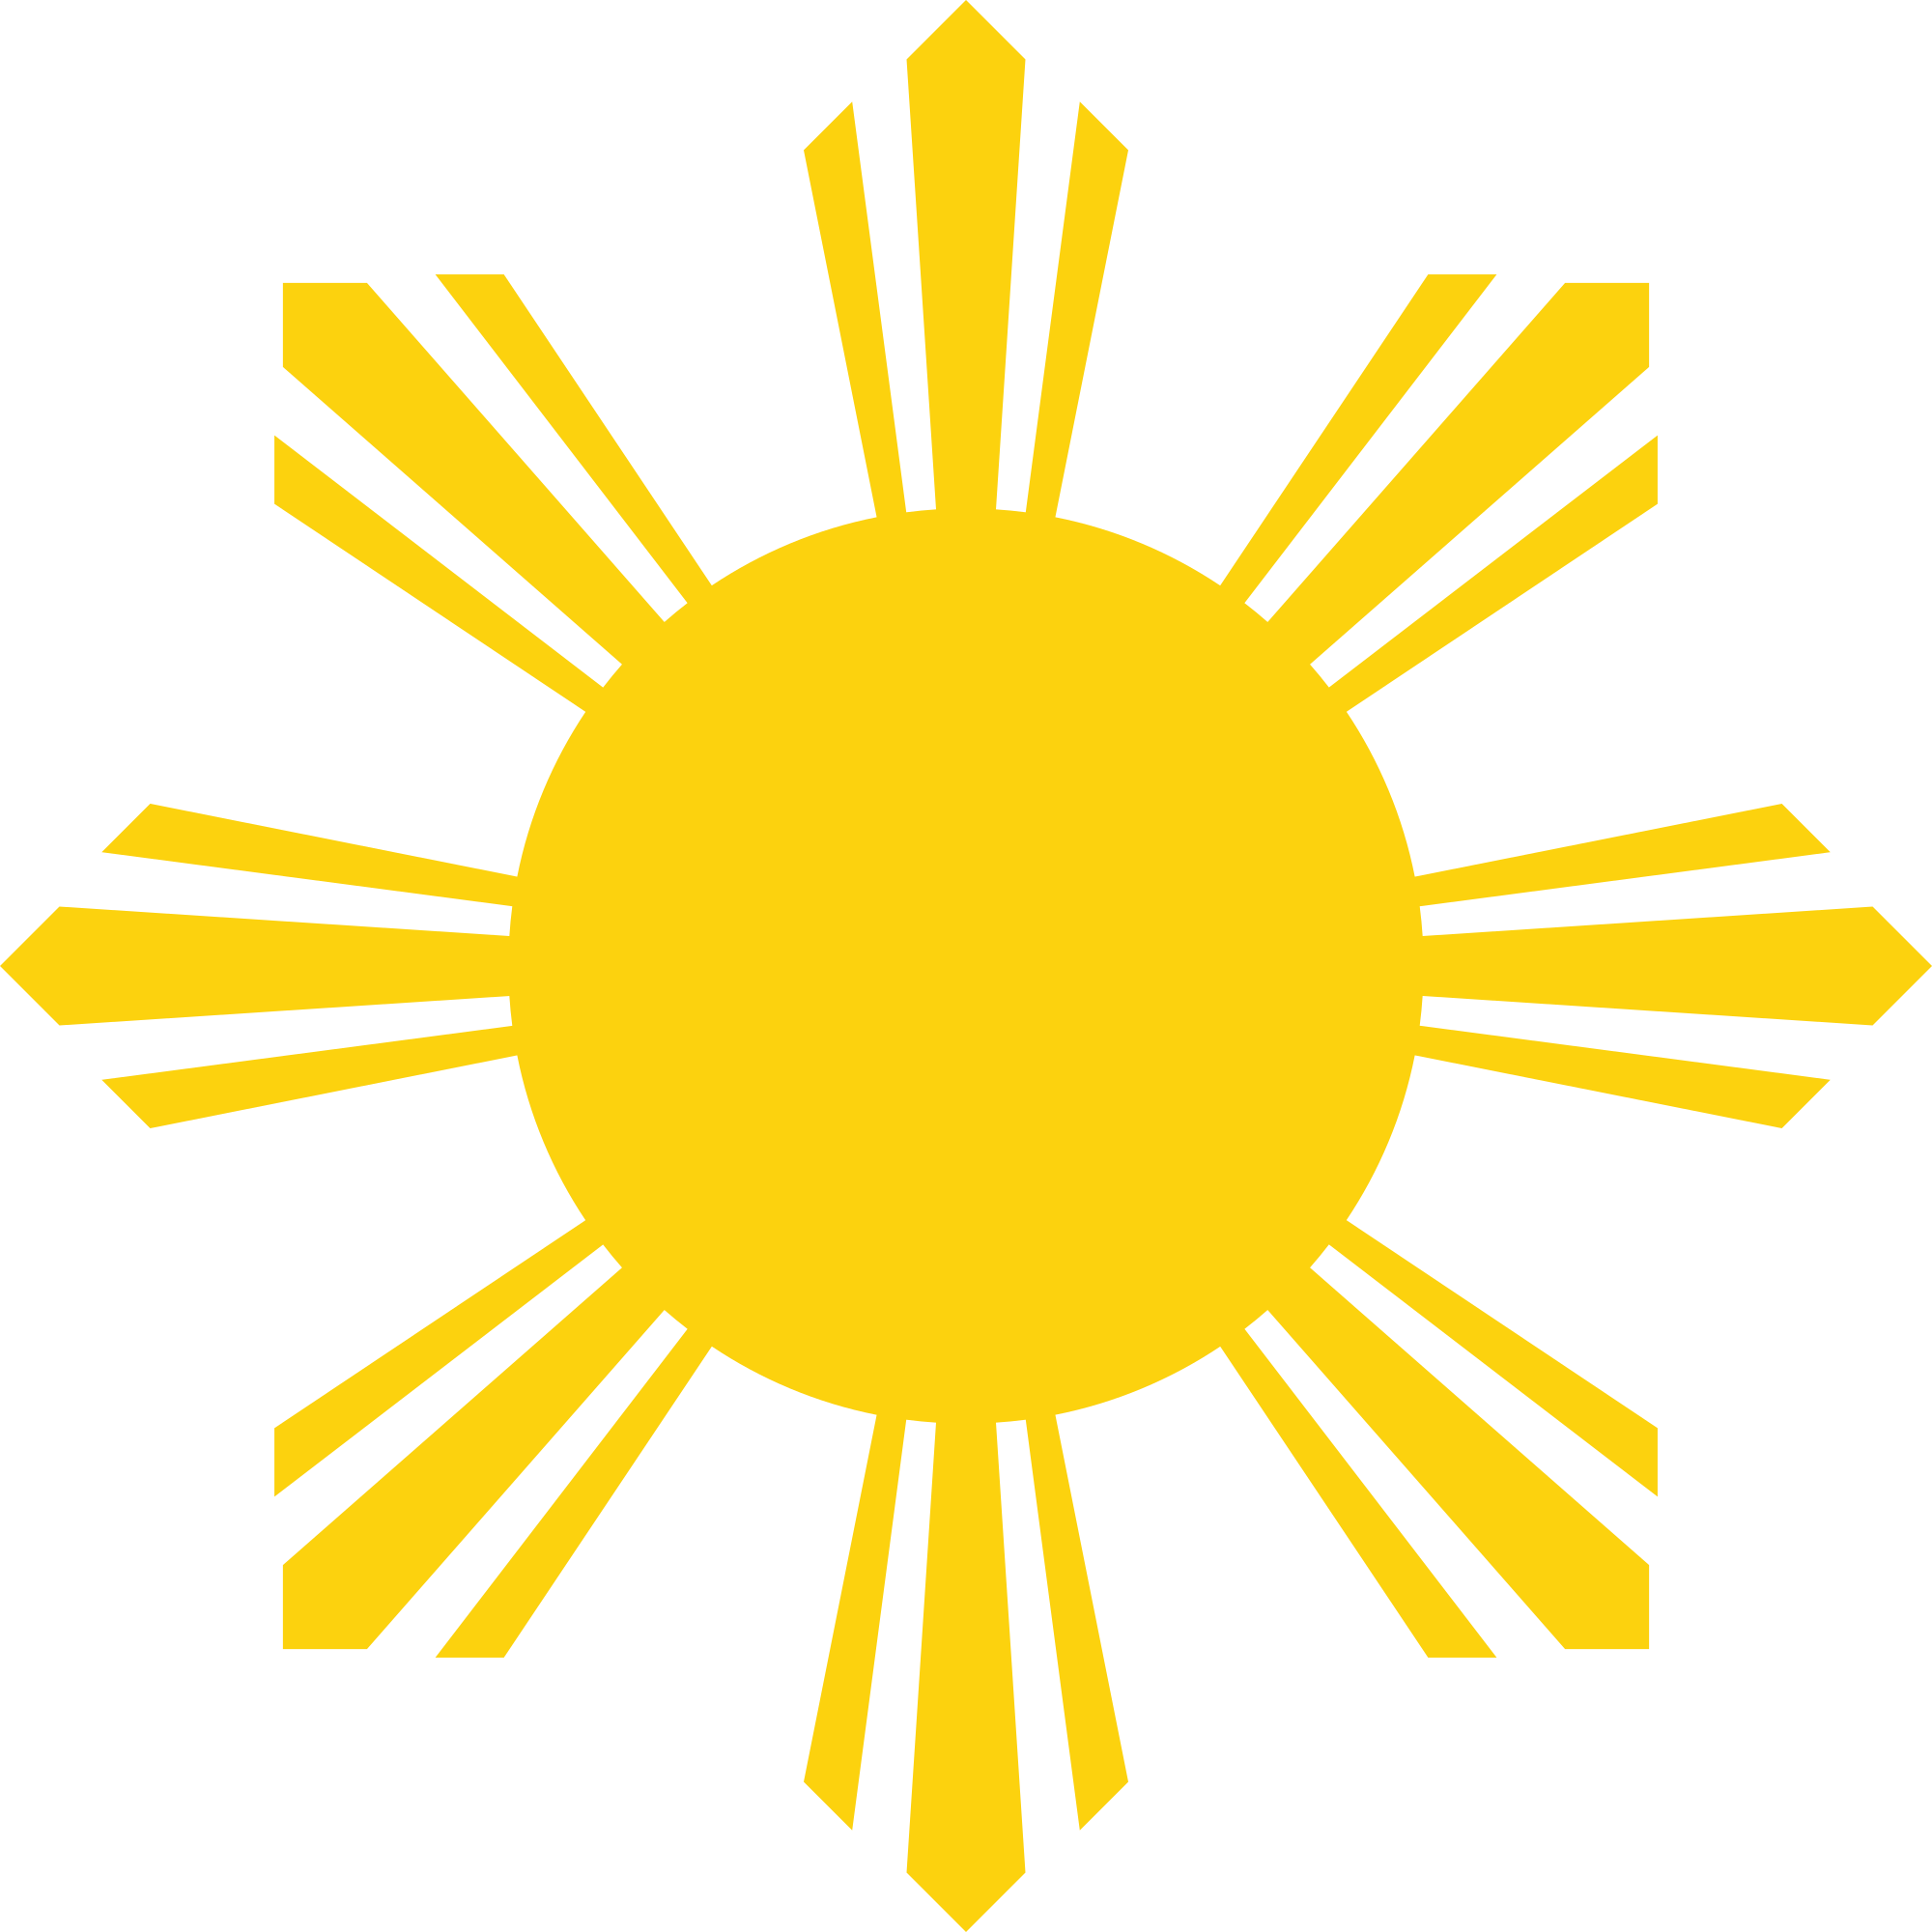 Image Result For Summer Sun Free Svg - Access To Sustainable Energy Programme (2000x2000)